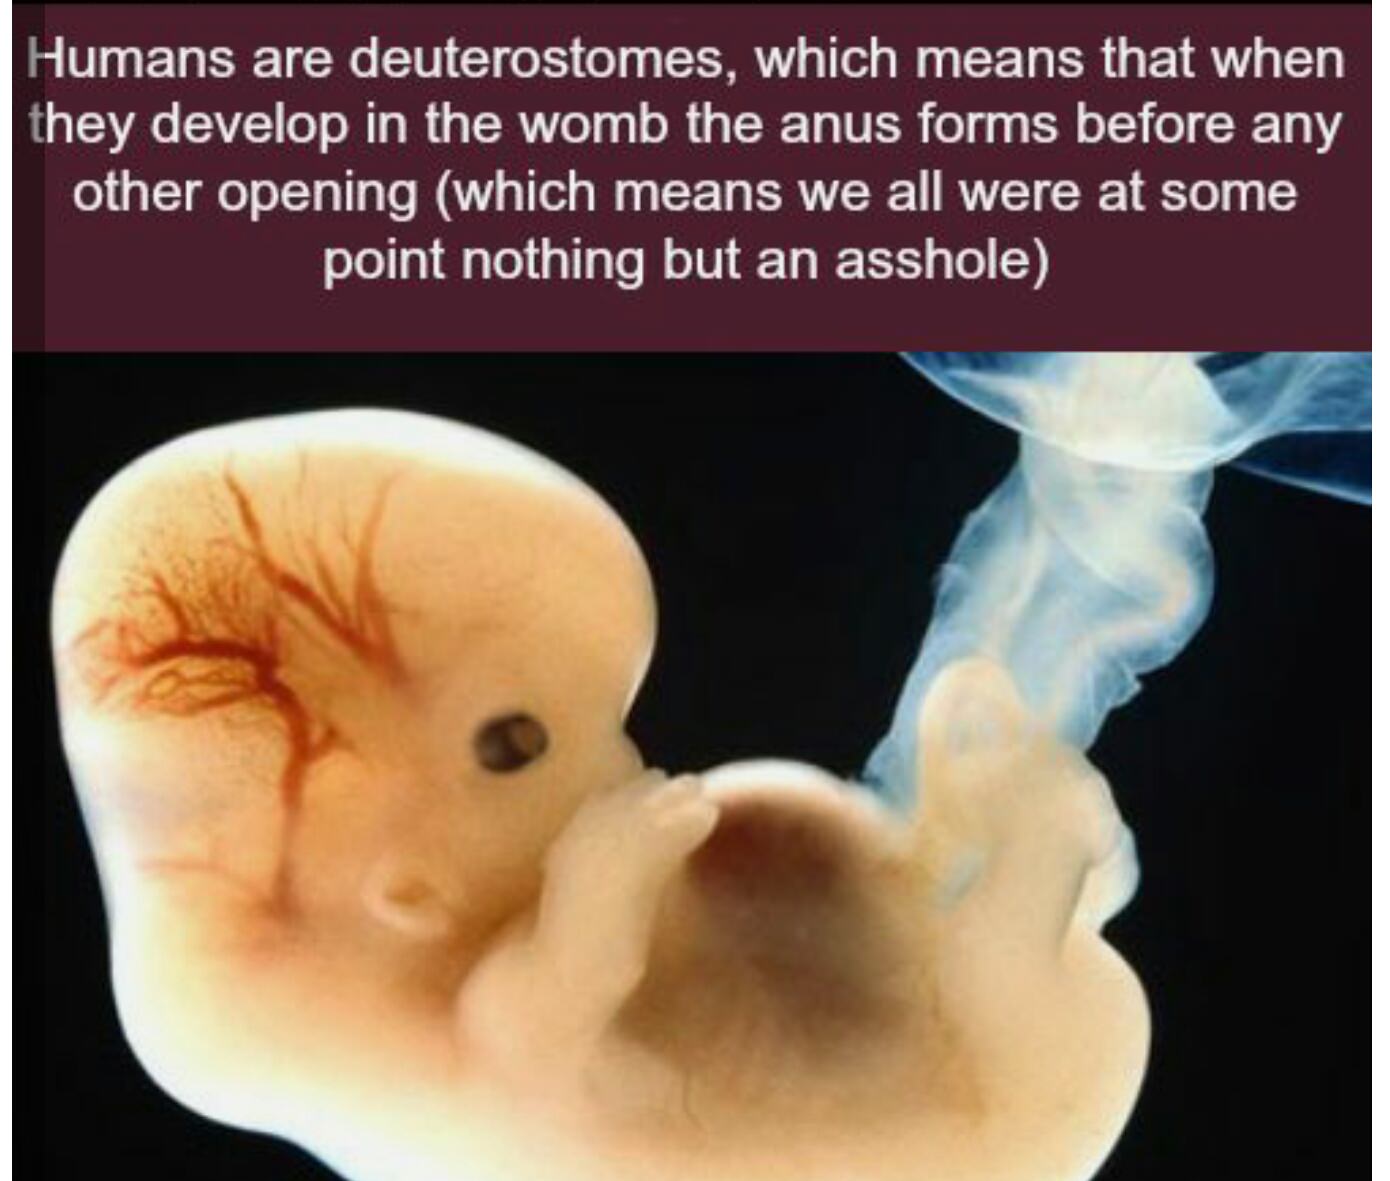 interesting facts interesting - Humans are deuterostomes, which means that when they develop in the womb the anus forms before any other opening which means we all were at some point nothing but an asshole